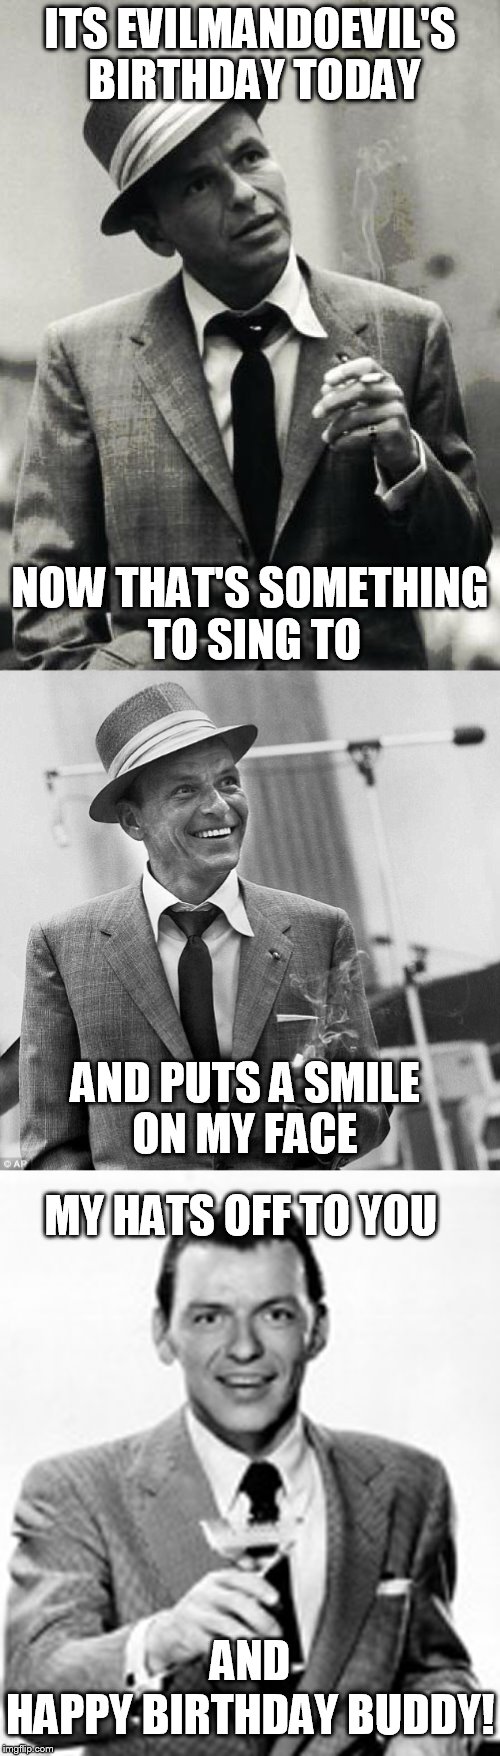 I don't do birthday memes often, but when I do its evilmandoevil's birthday! | ITS EVILMANDOEVIL'S BIRTHDAY TODAY; NOW THAT'S SOMETHING TO SING TO; AND PUTS A SMILE ON MY FACE; MY HATS OFF TO YOU; AND; HAPPY BIRTHDAY BUDDY! | image tagged in memes,evilmandoevil,birthday,frank sinatra,happy birthday,celebration | made w/ Imgflip meme maker